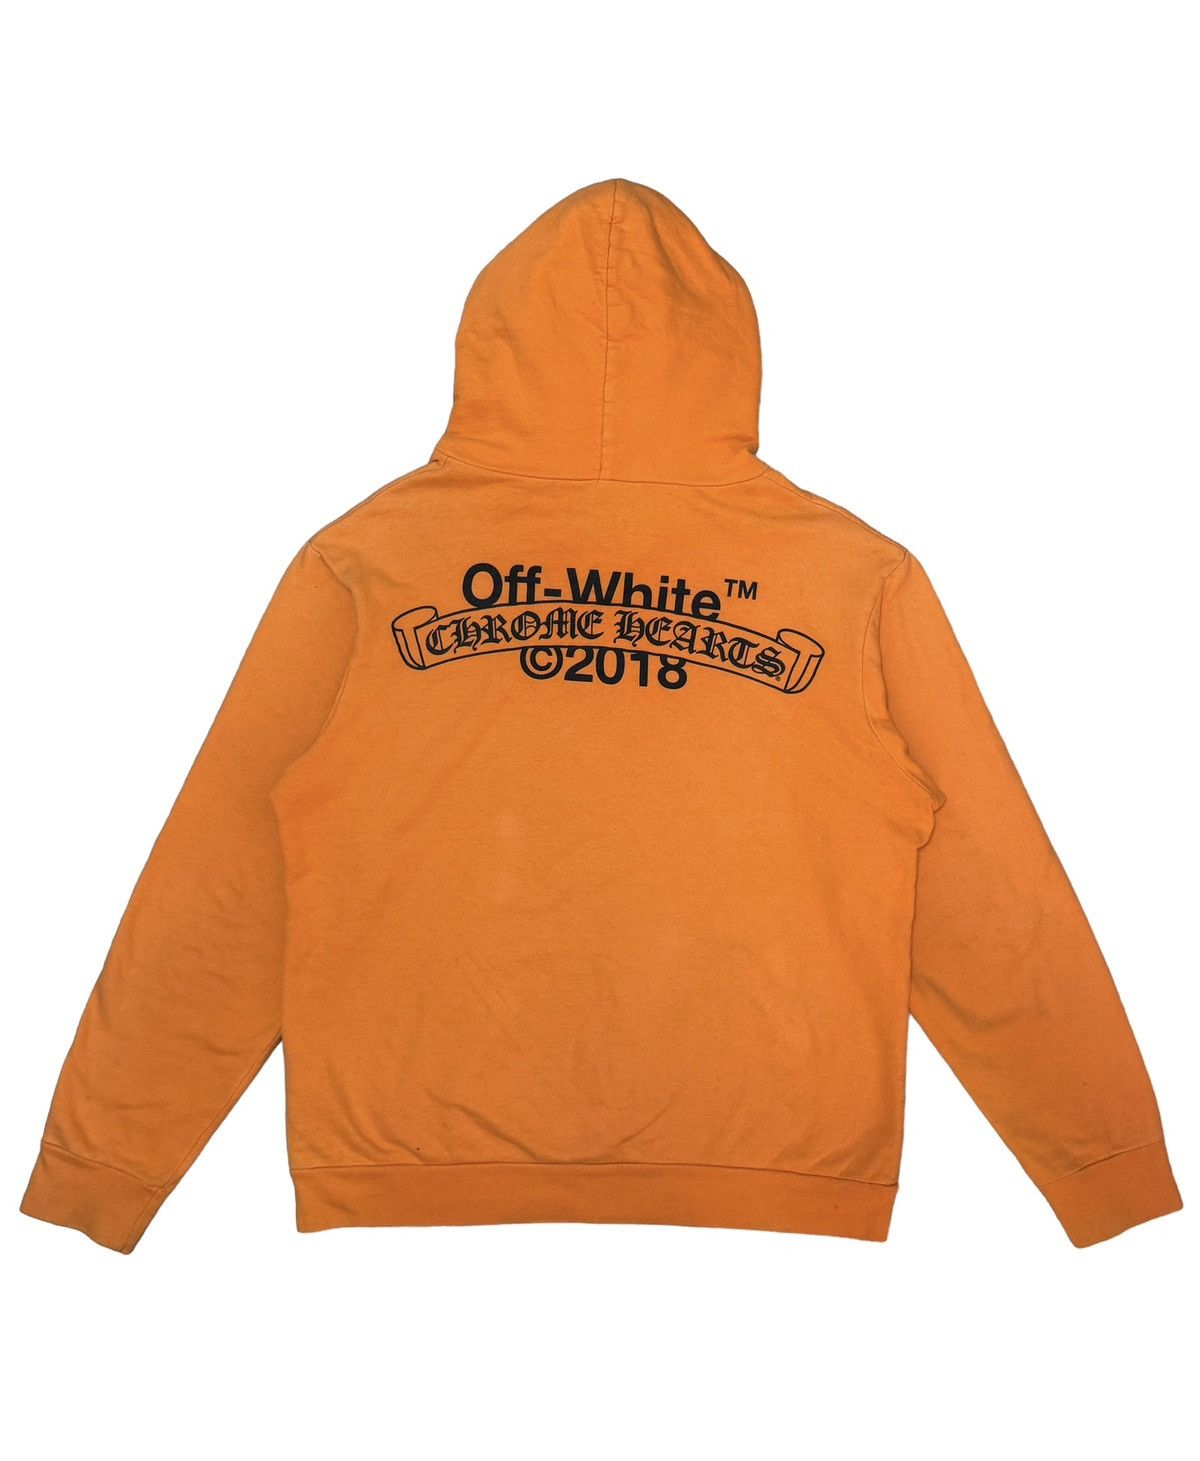 Off-White Off-White Chrome Hearts Hoodie | Grailed